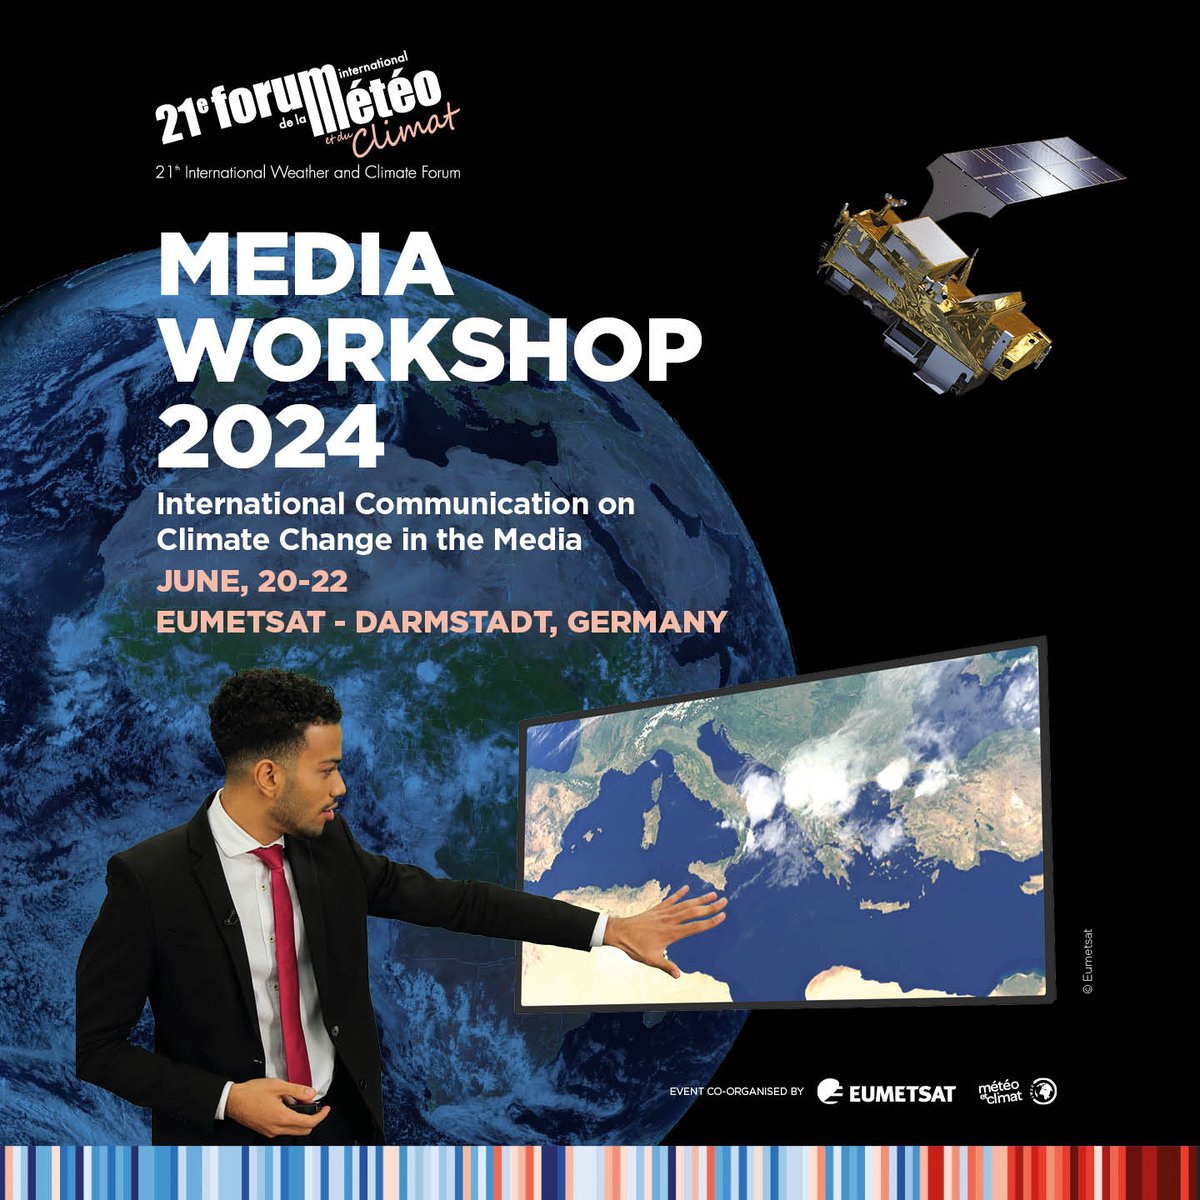 📢 Weather presenters from all around the world 🌍committed to climate action with our MEDIA WORKSHOP! Co-organised by @eumetsat from June 20th to 22nd, Journalists & Forecasters will work on #communication on #climatechange in the #media. 🧵#FIMC2024 #MediaWorkshop2024